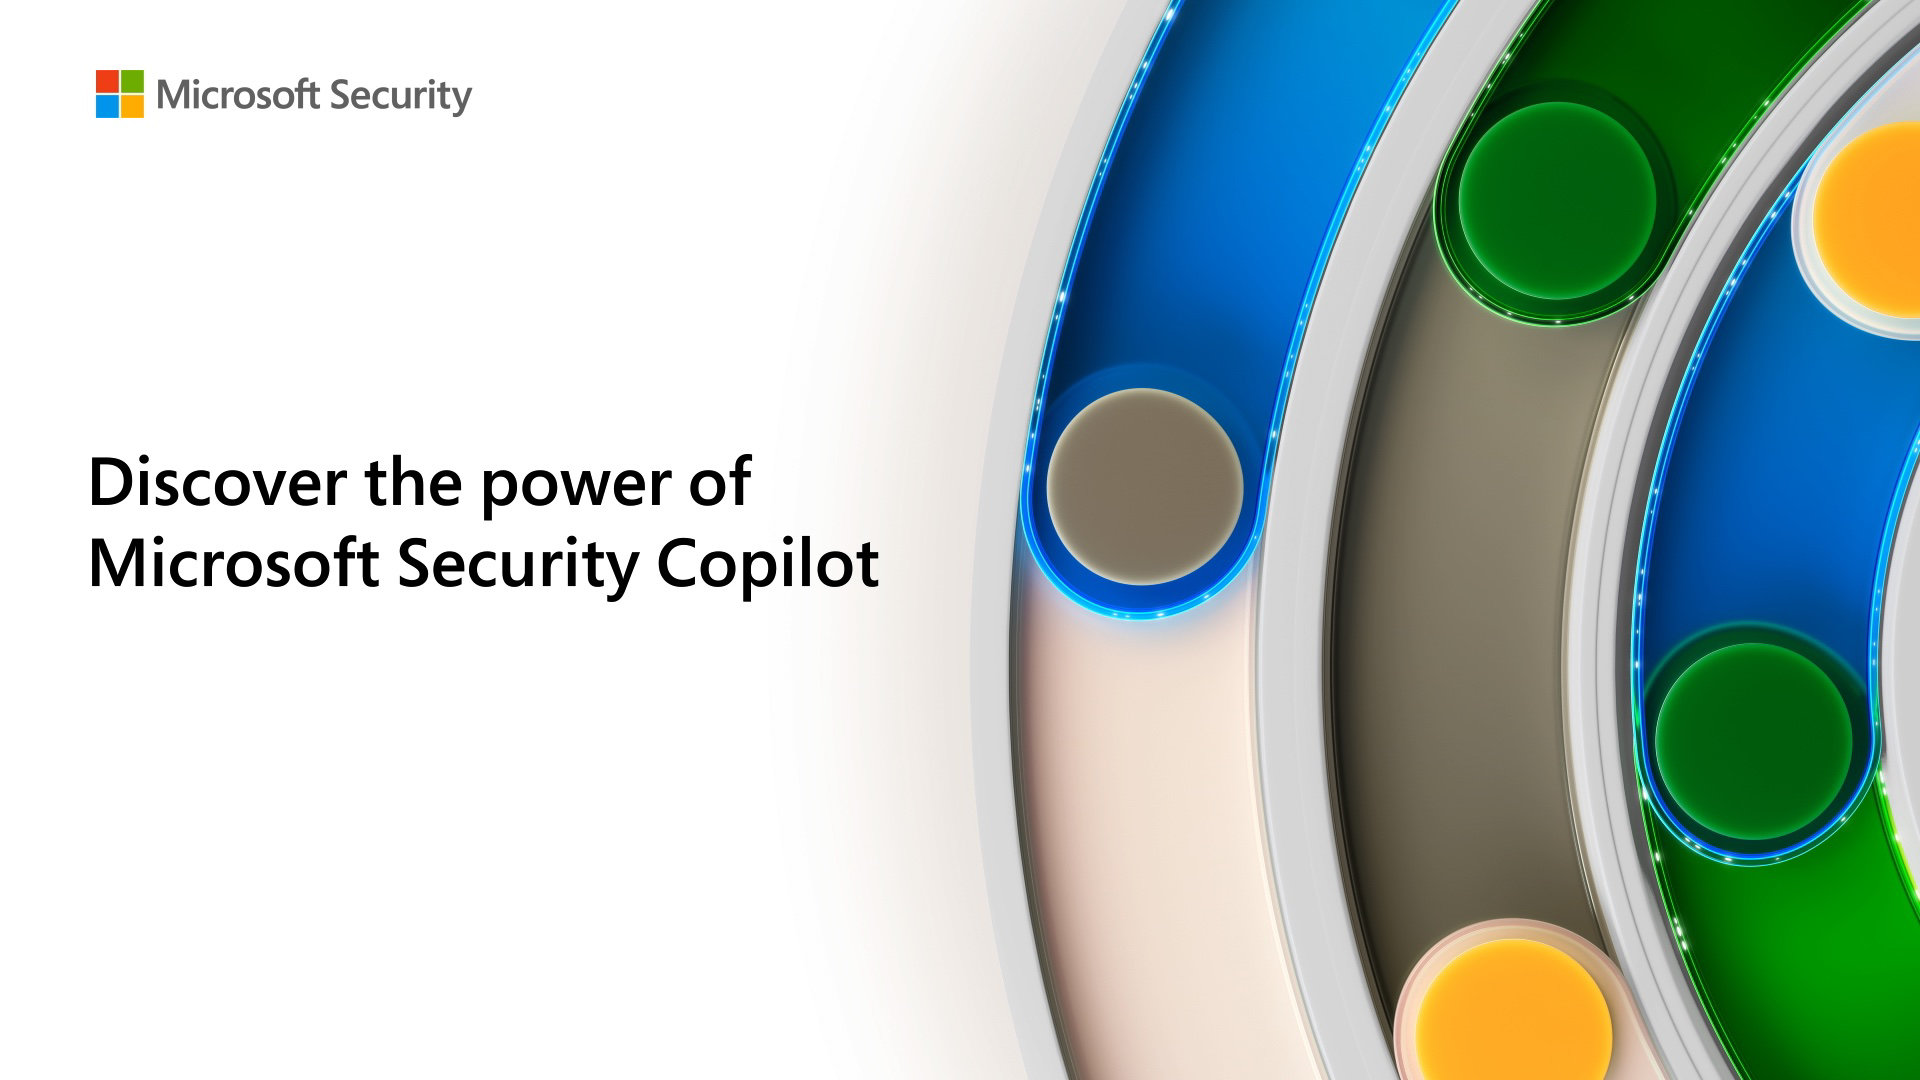 Copilot for Security Announcement Video | Microsoft Security